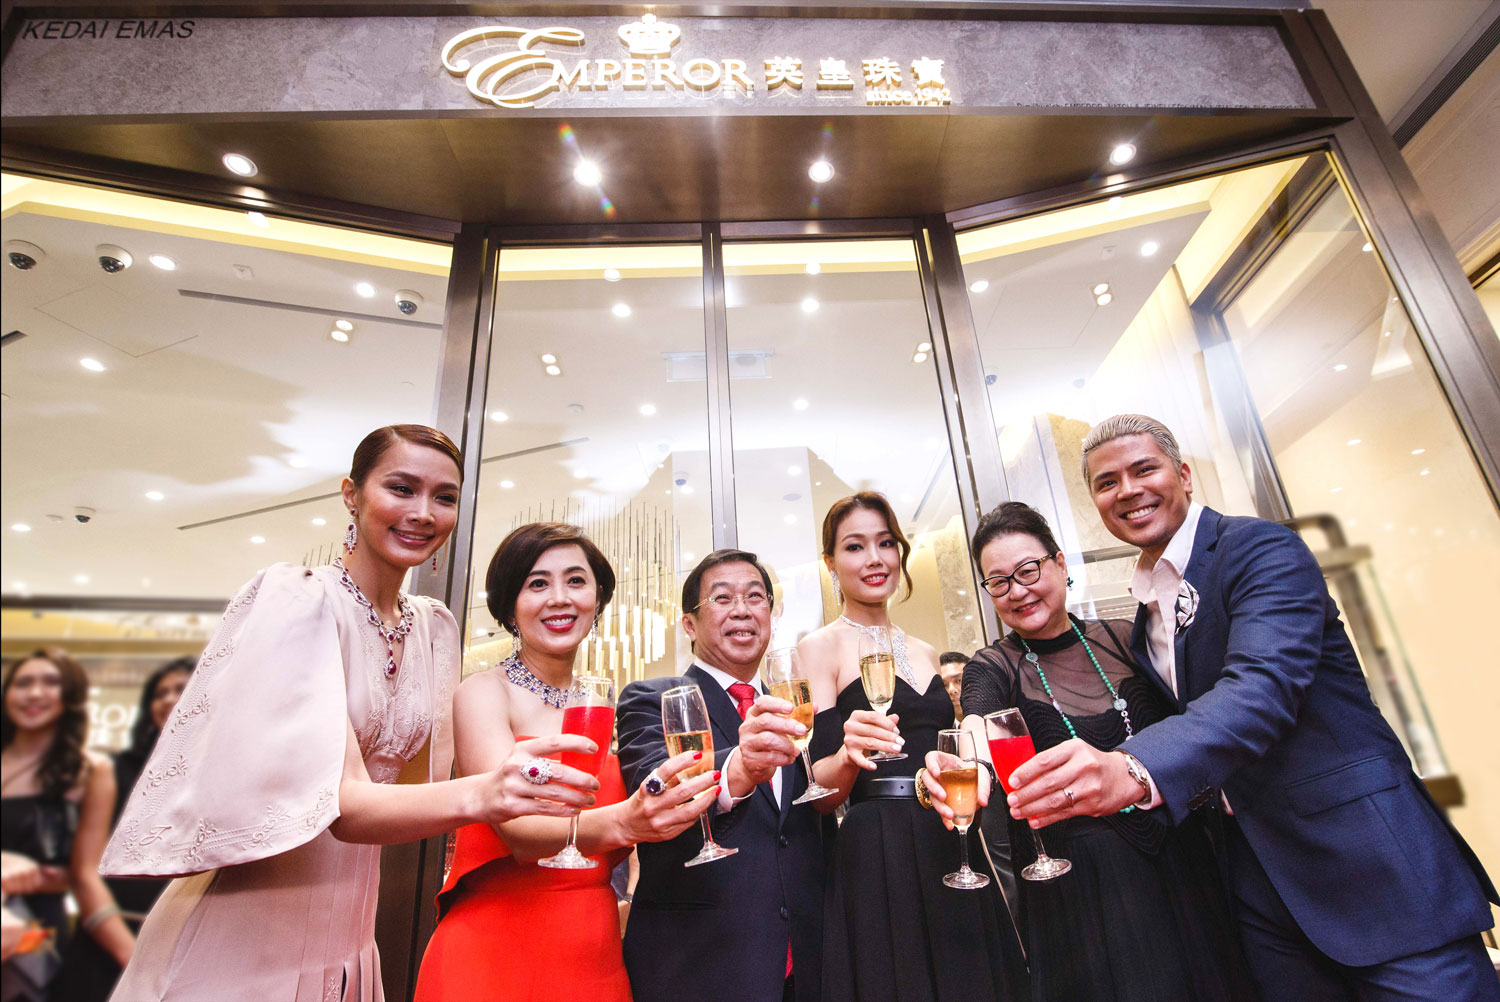  Emperor Jewellery’s first ever flagship store in Pavilion Kuala Lumpur, had a grand opening with (From the left) Ms Scha Al-Yahya, Malaysian celebrity; Ms Cindy Yeung, Chairperson and Chief Executive Officer of Emperor Watch and Jewellery; Mr Tan Kok Wai, Malaysia Special Envoy to the People’s Republic of China; Ms Joey Yung, Hong Kong Pop Star; Dato Joyce Yap, Chief Executive Officer of Retail of Pavilion Kuala Lumpur and Mr Awal Ashaari, Malaysian celebrity as officiating guests.